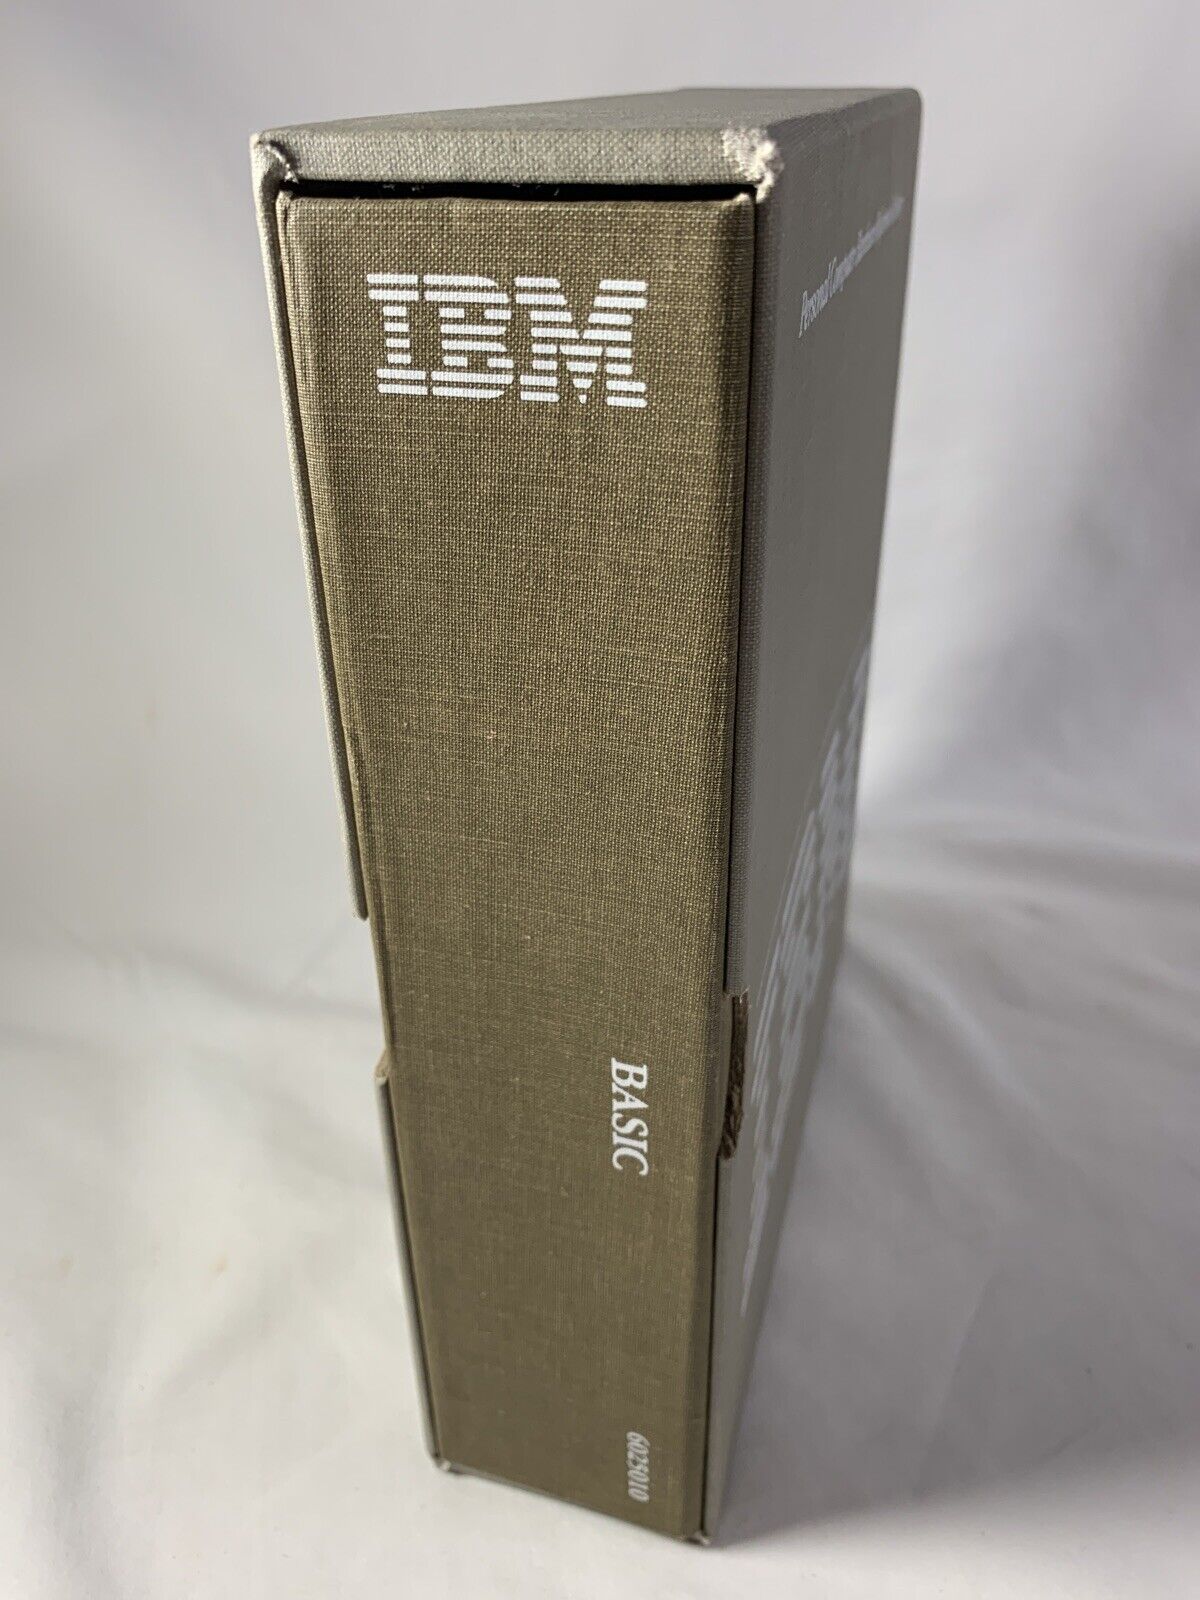 Microsoft IBM Personal Computer HARDWARE REFERENCE LIBRARY, BASIC PC 6025010